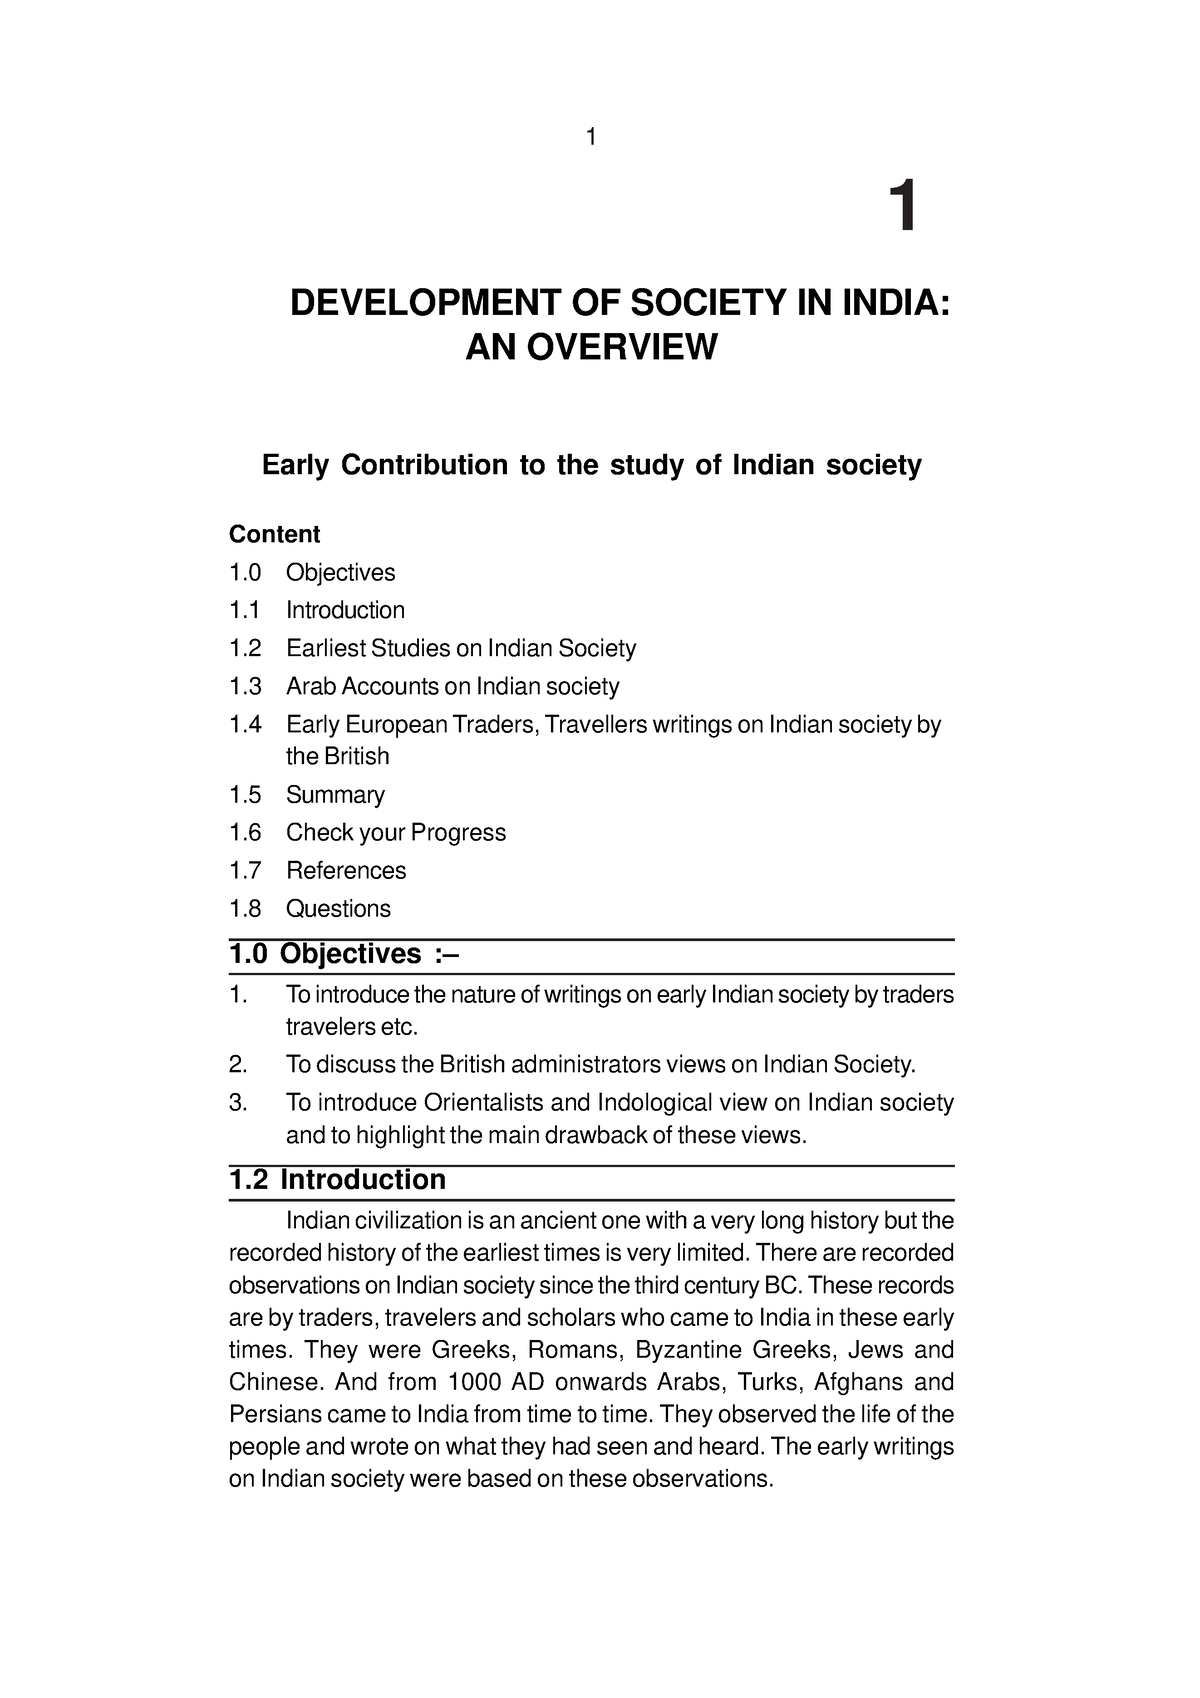 dissertation topics in sociology in india